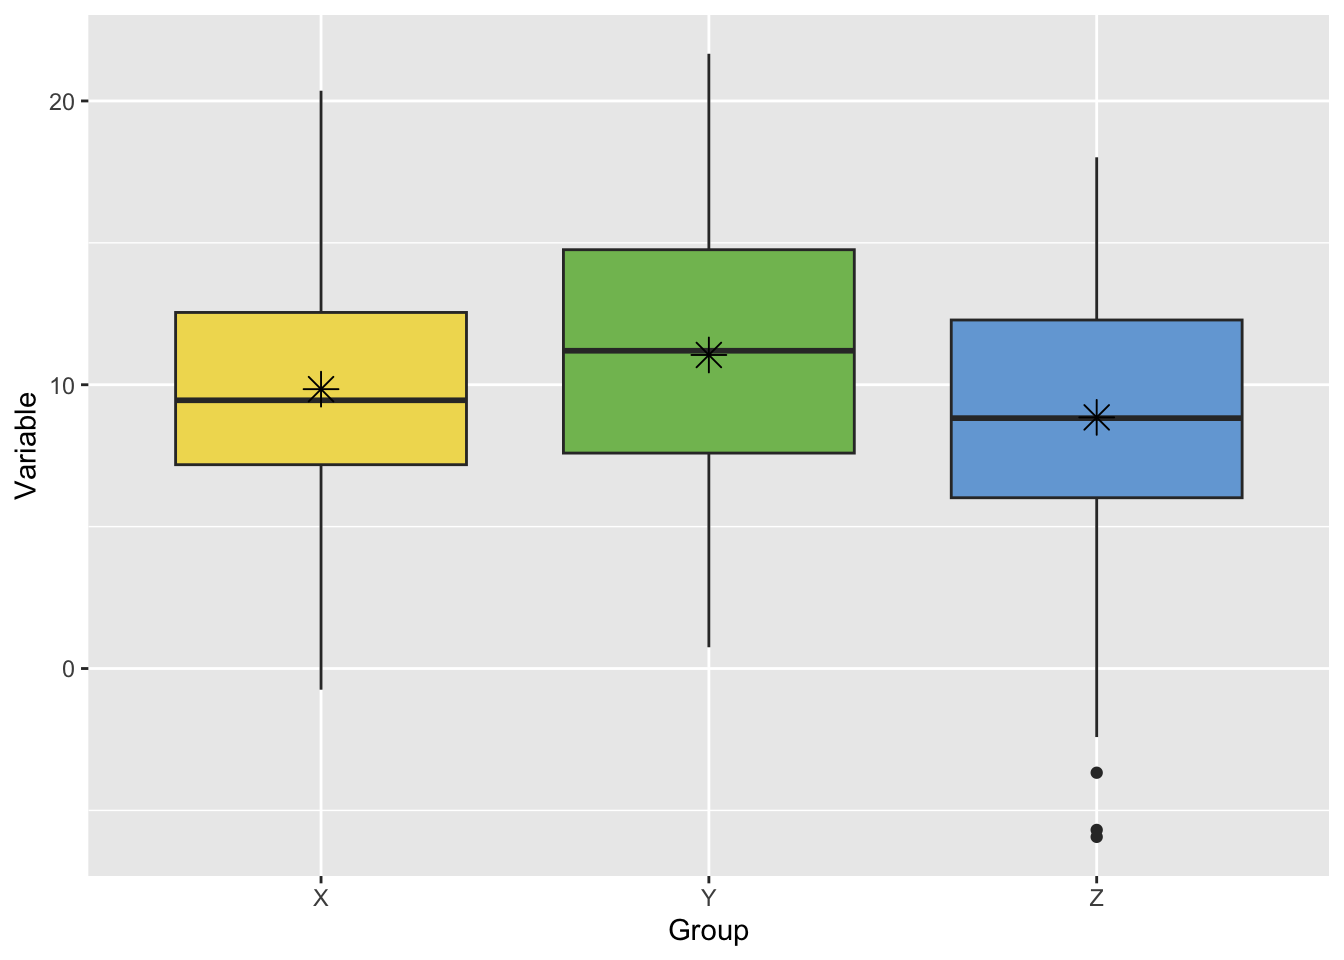 Comparative boxplots of three different samples